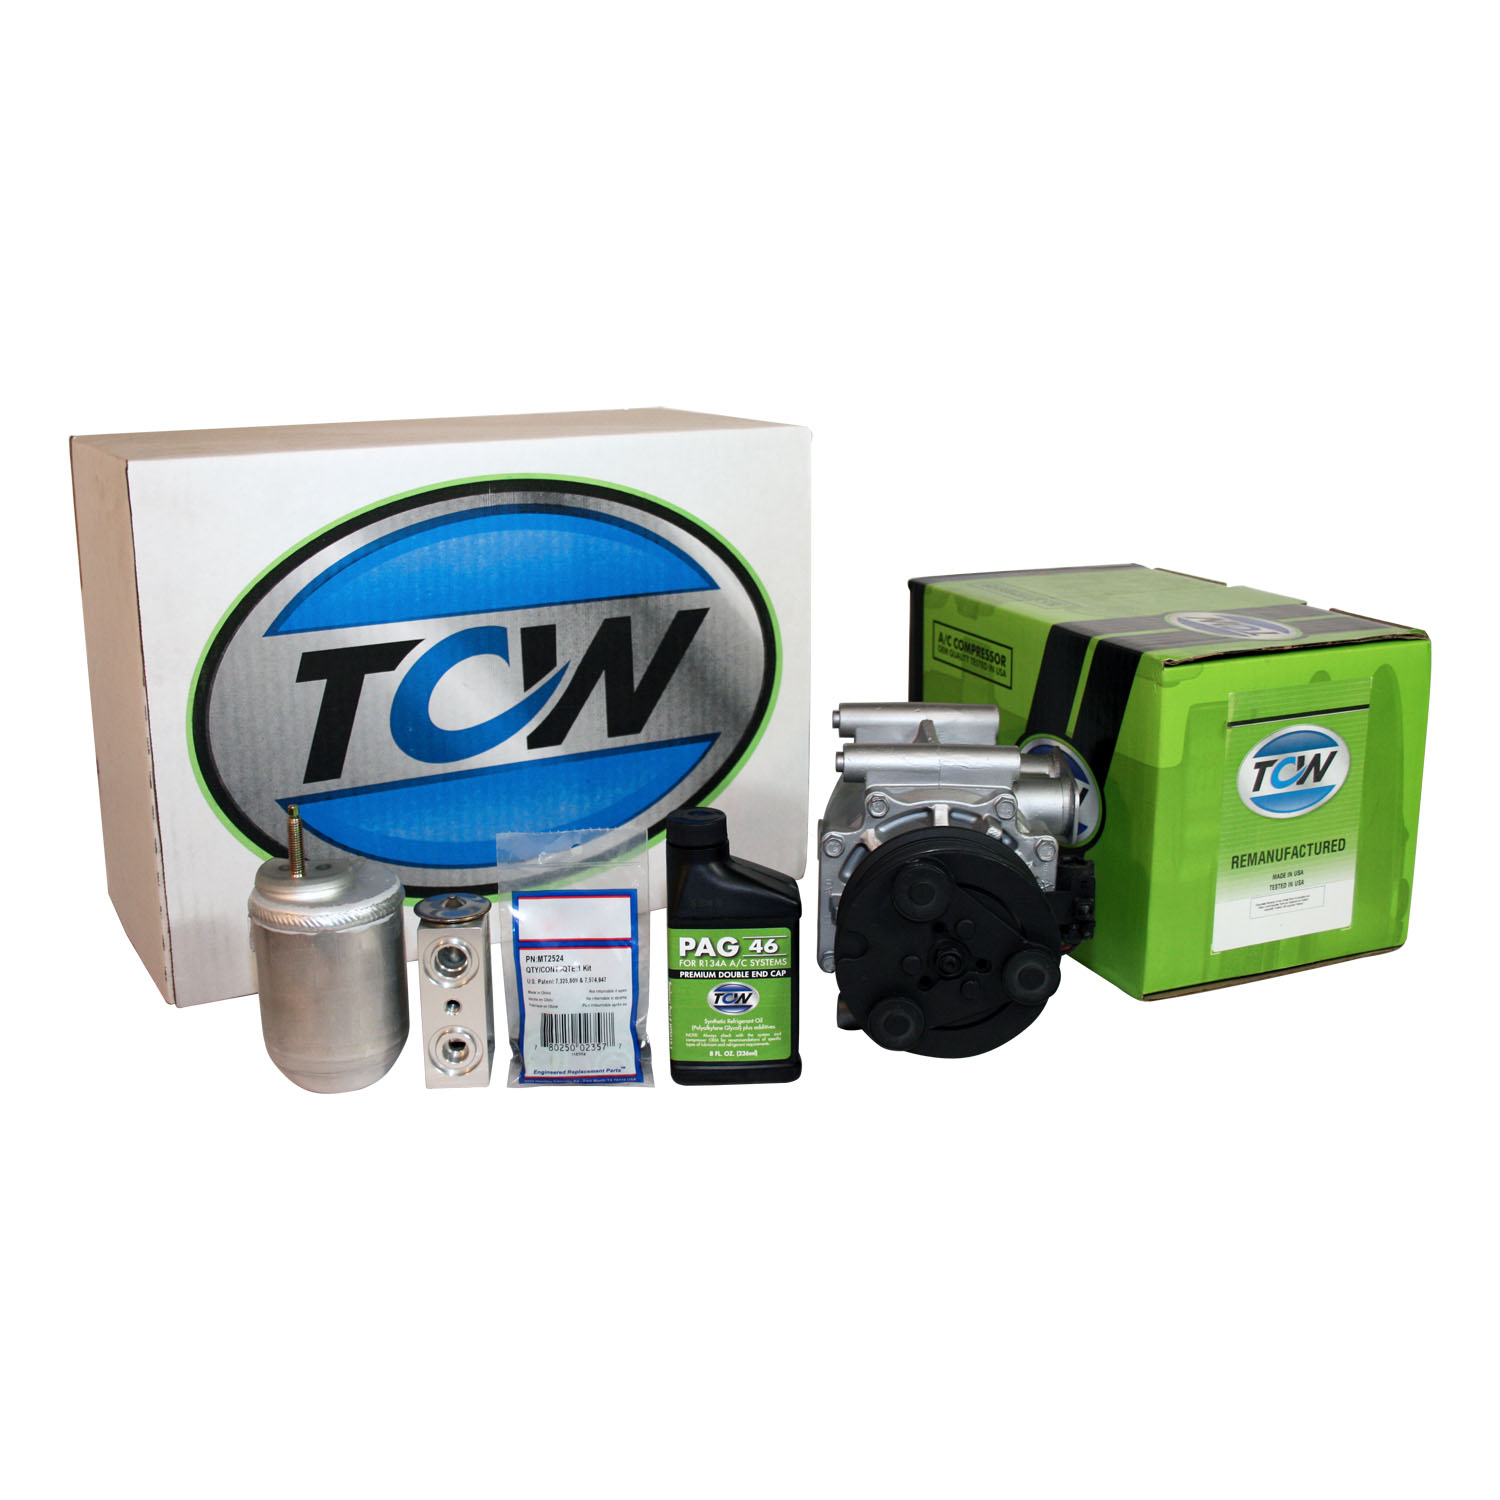 TCW Vehicle A/C Kit K1000250R Remanufactured Product Image field_60b6a13a6e67c